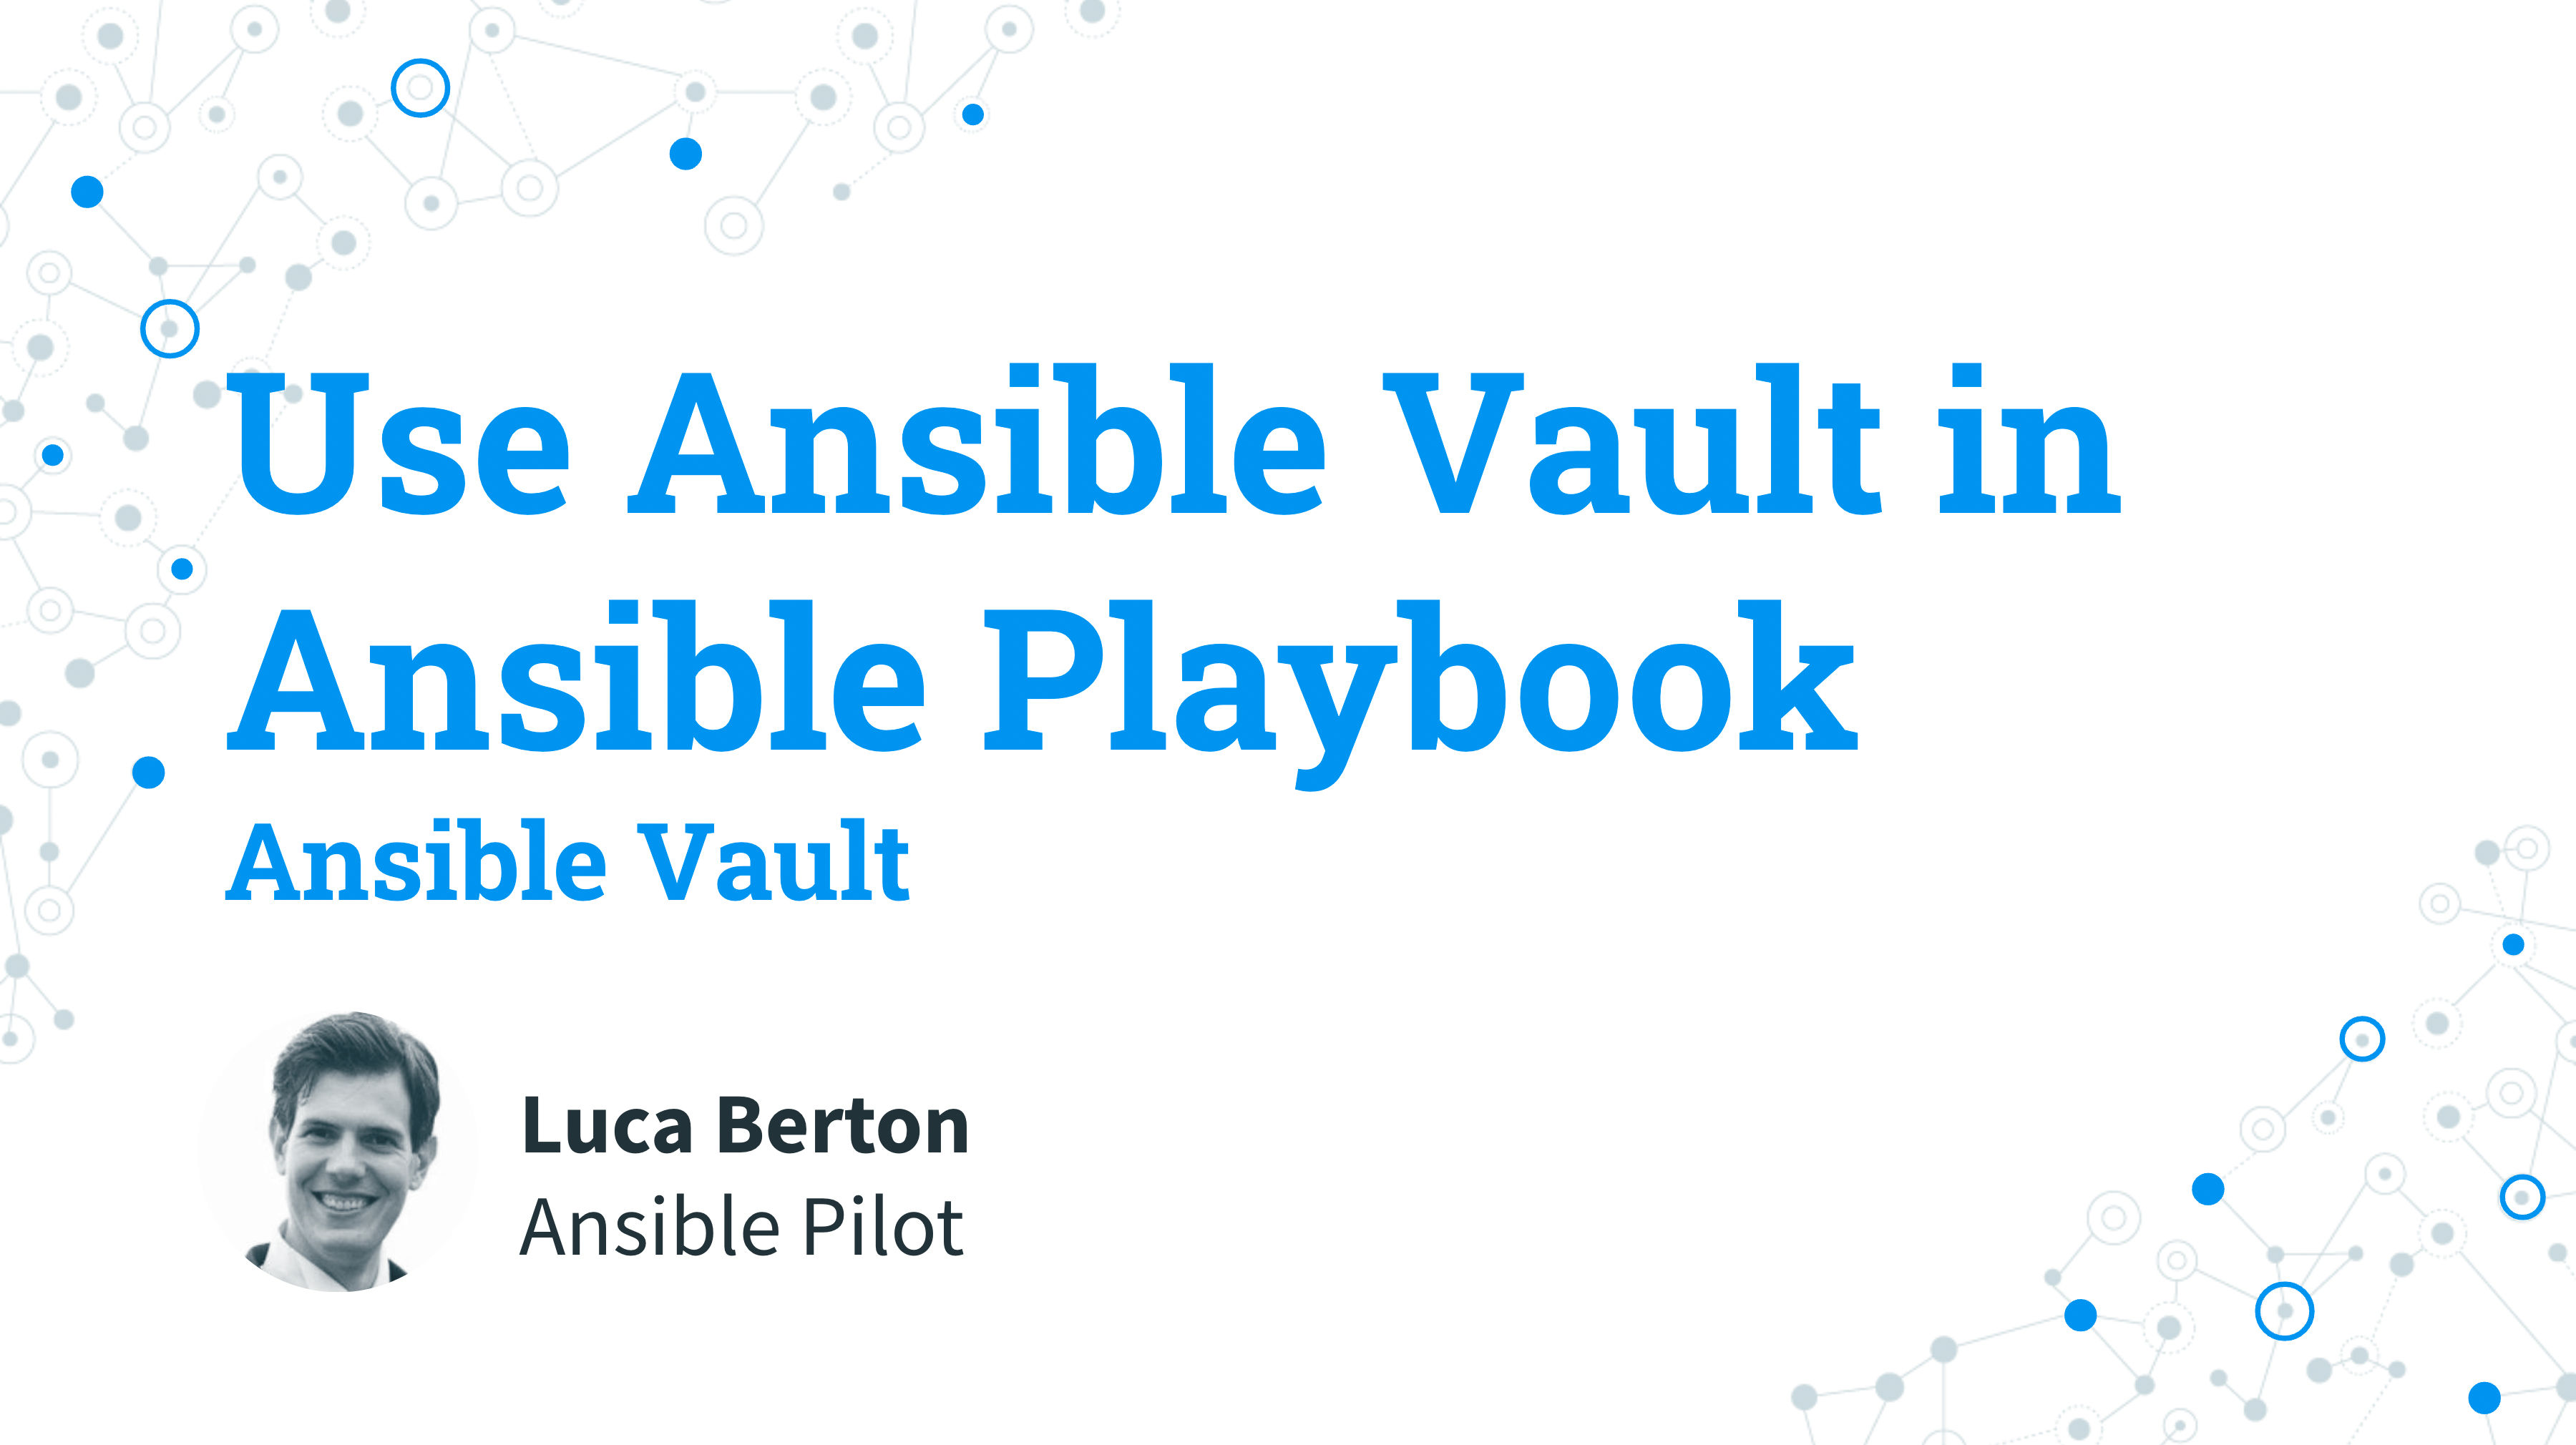 Use Ansible Vault in Ansbile Playbook - ansible vault